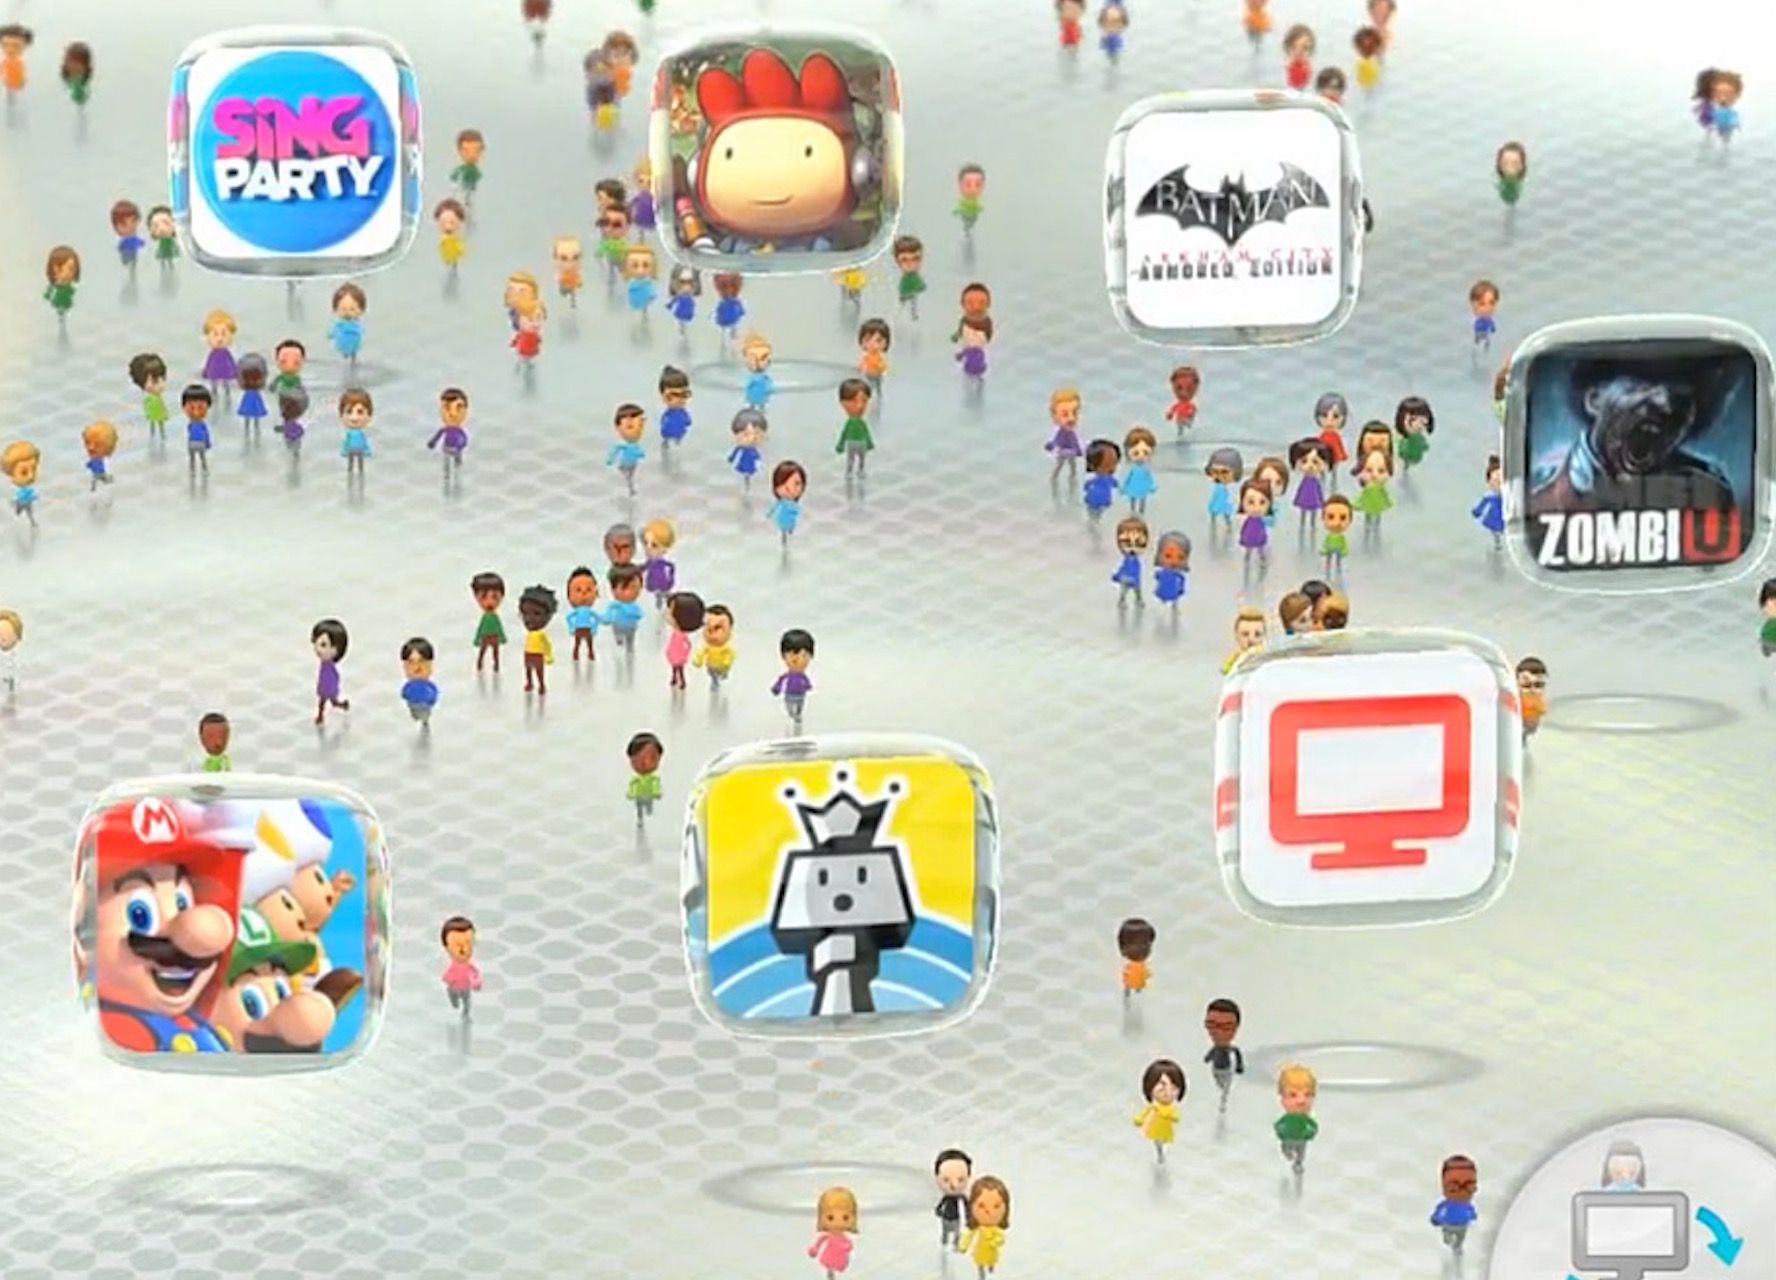 nintendo doesn t want to make mobile games but it will do a mii app for smartphones image 1